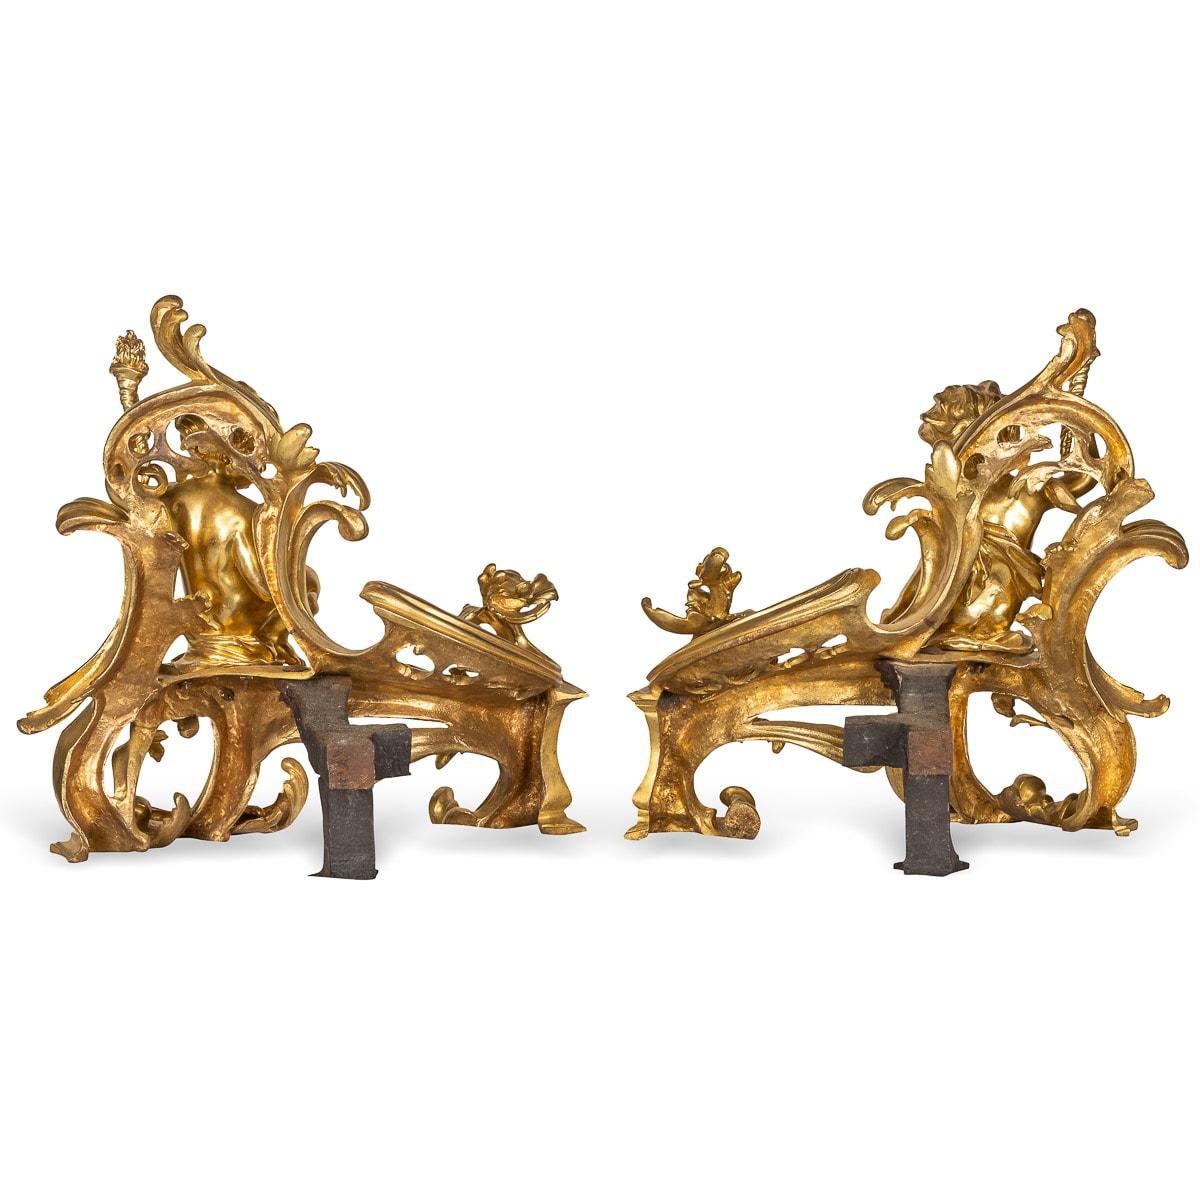 Antique 19th century French exceptionally made cast pair of gilt bronze fireplace chenets. These chenets are adorned by reclining puttis holding a torch on beautiful rococo scrolling foliage.

CONDITION
In Great Condition - No